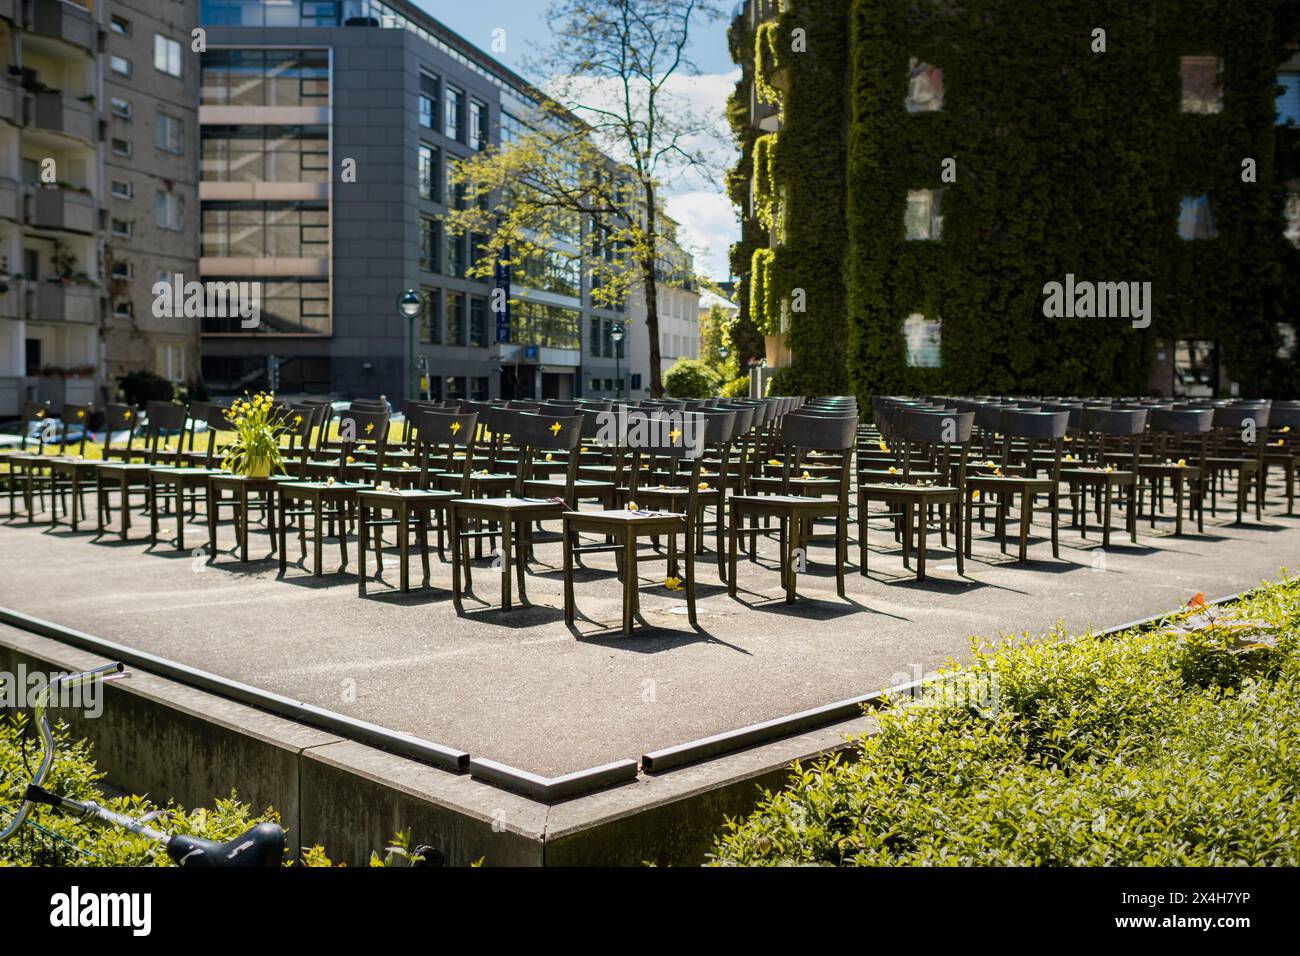 Holocaust memorial with 140 empty bronze chairs. The plateau is located where the former synagogue was built. Place of dark German history in Saxony. Stock Photo